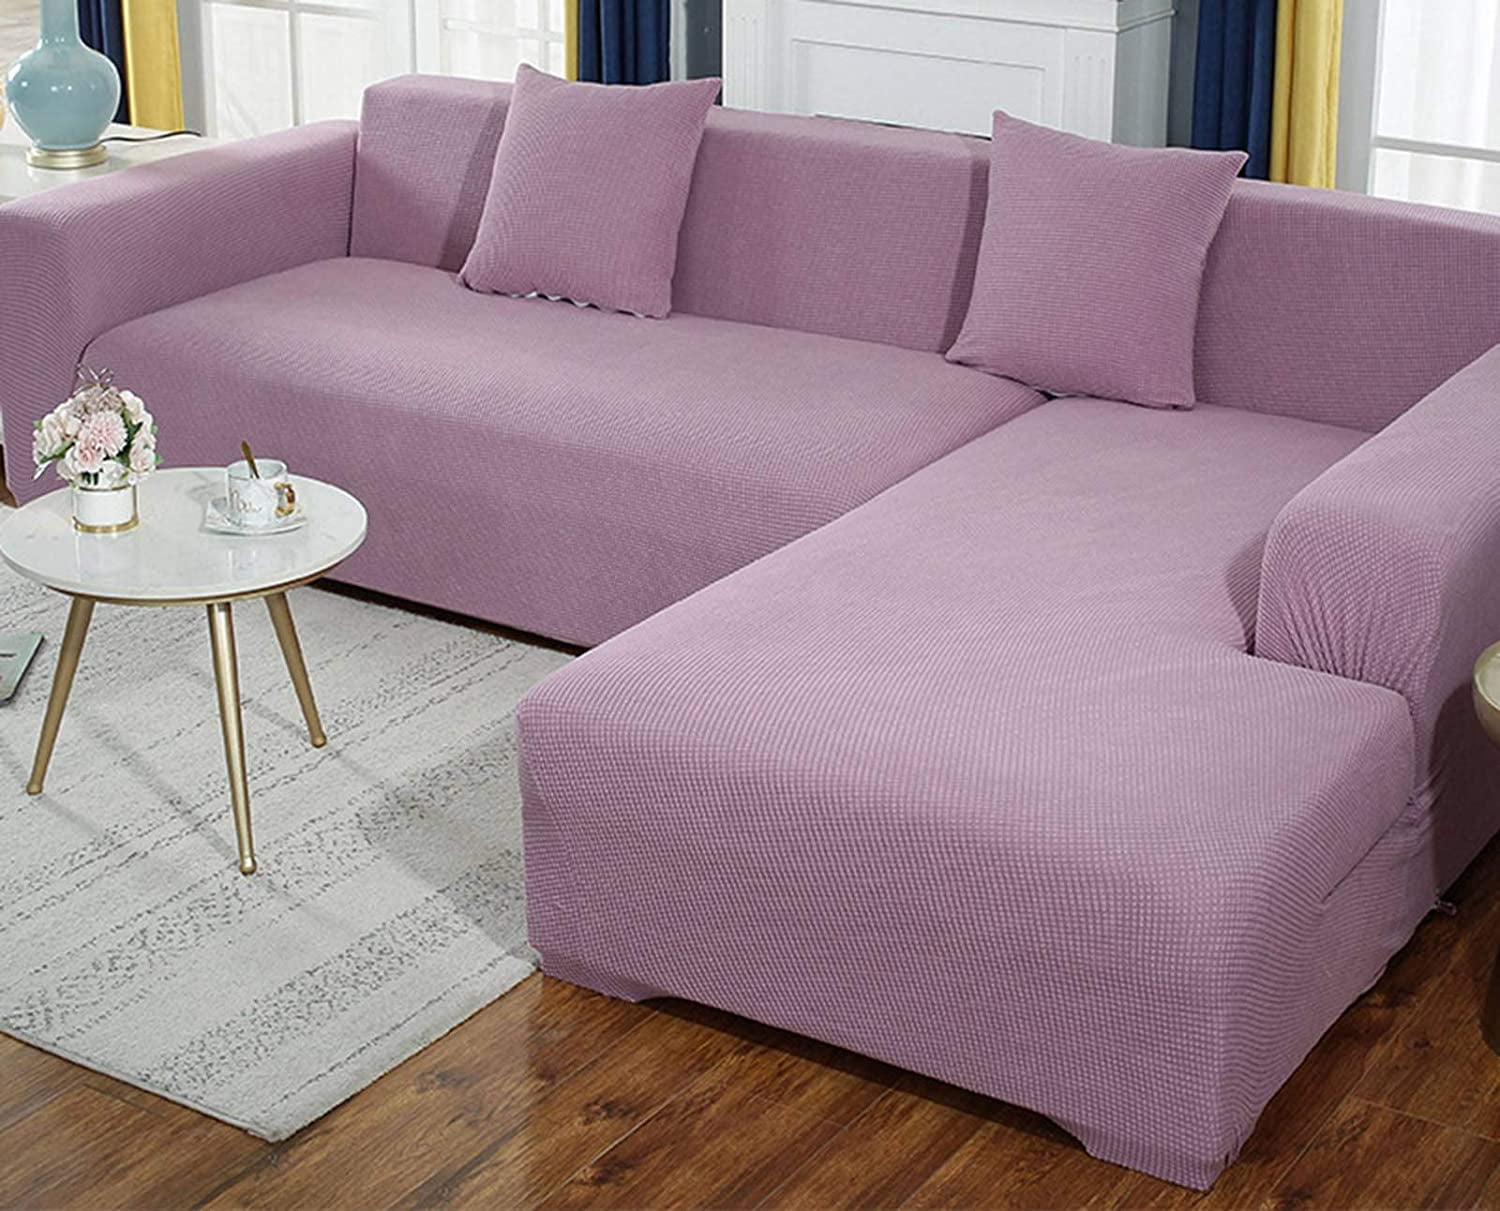 washable cover for leather sofa